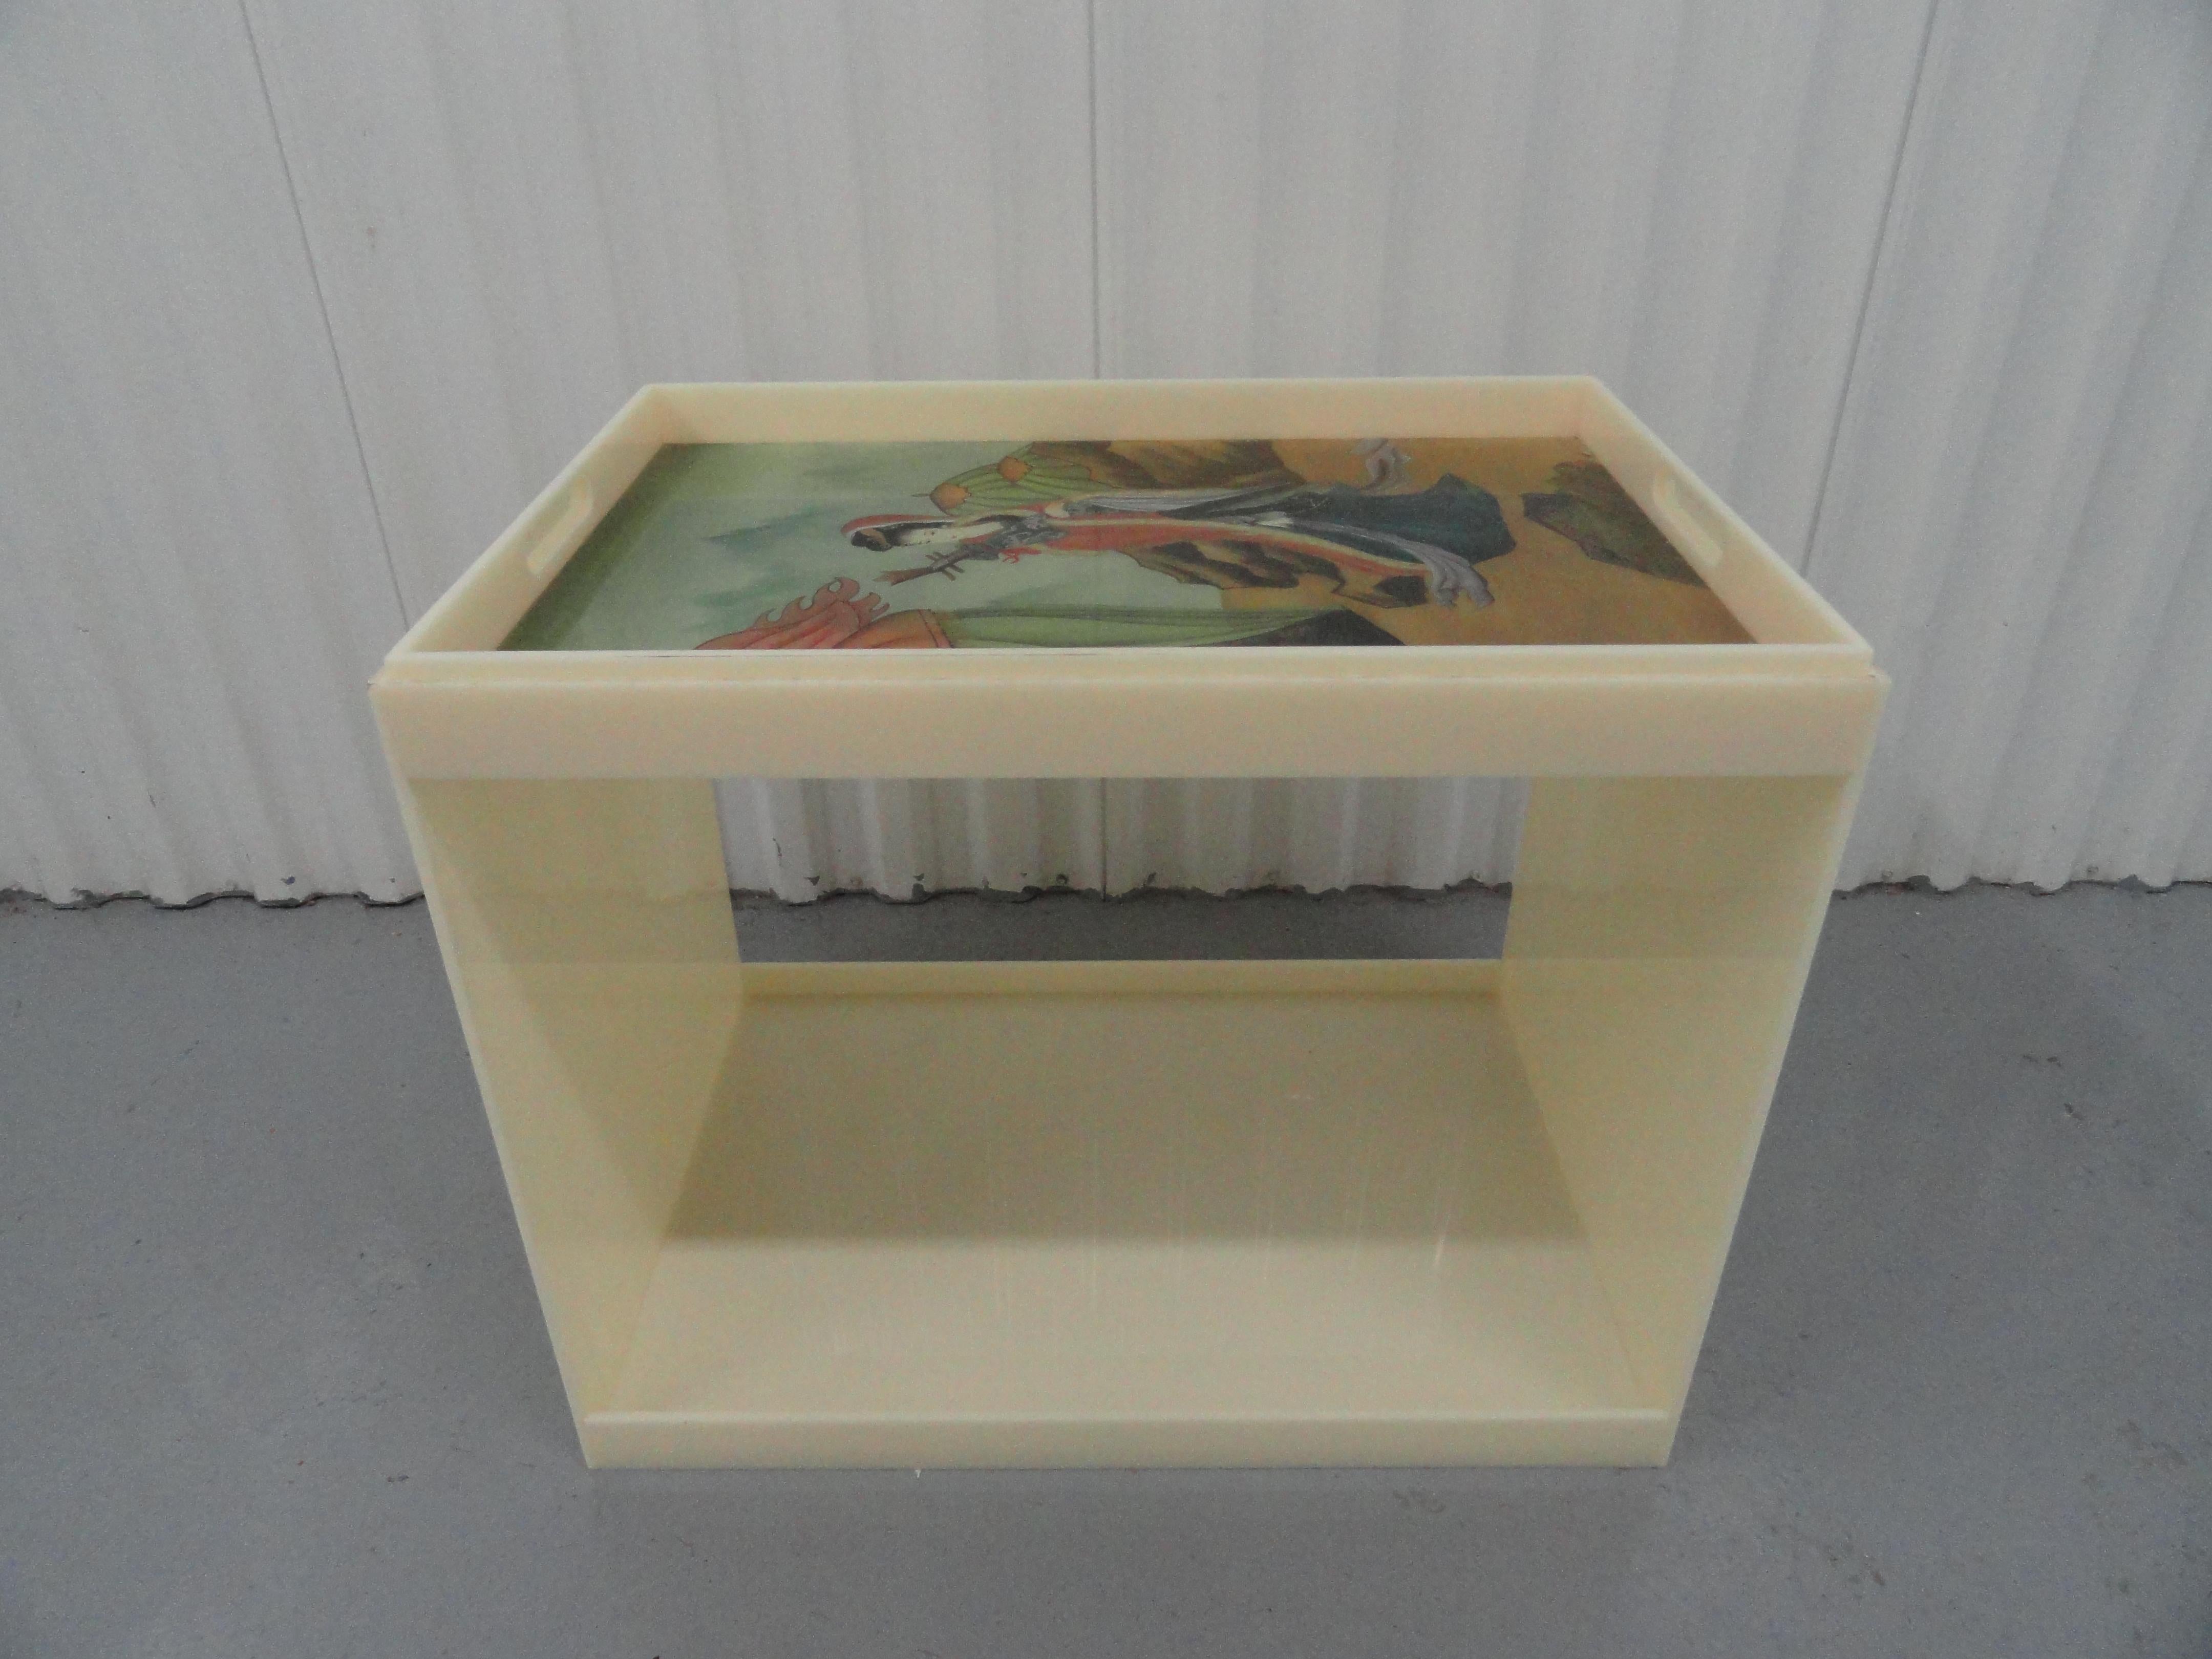 Custom acrylic table with removable top. The top contain an inserted piece of reverse glass painted art of an Asian female figure.